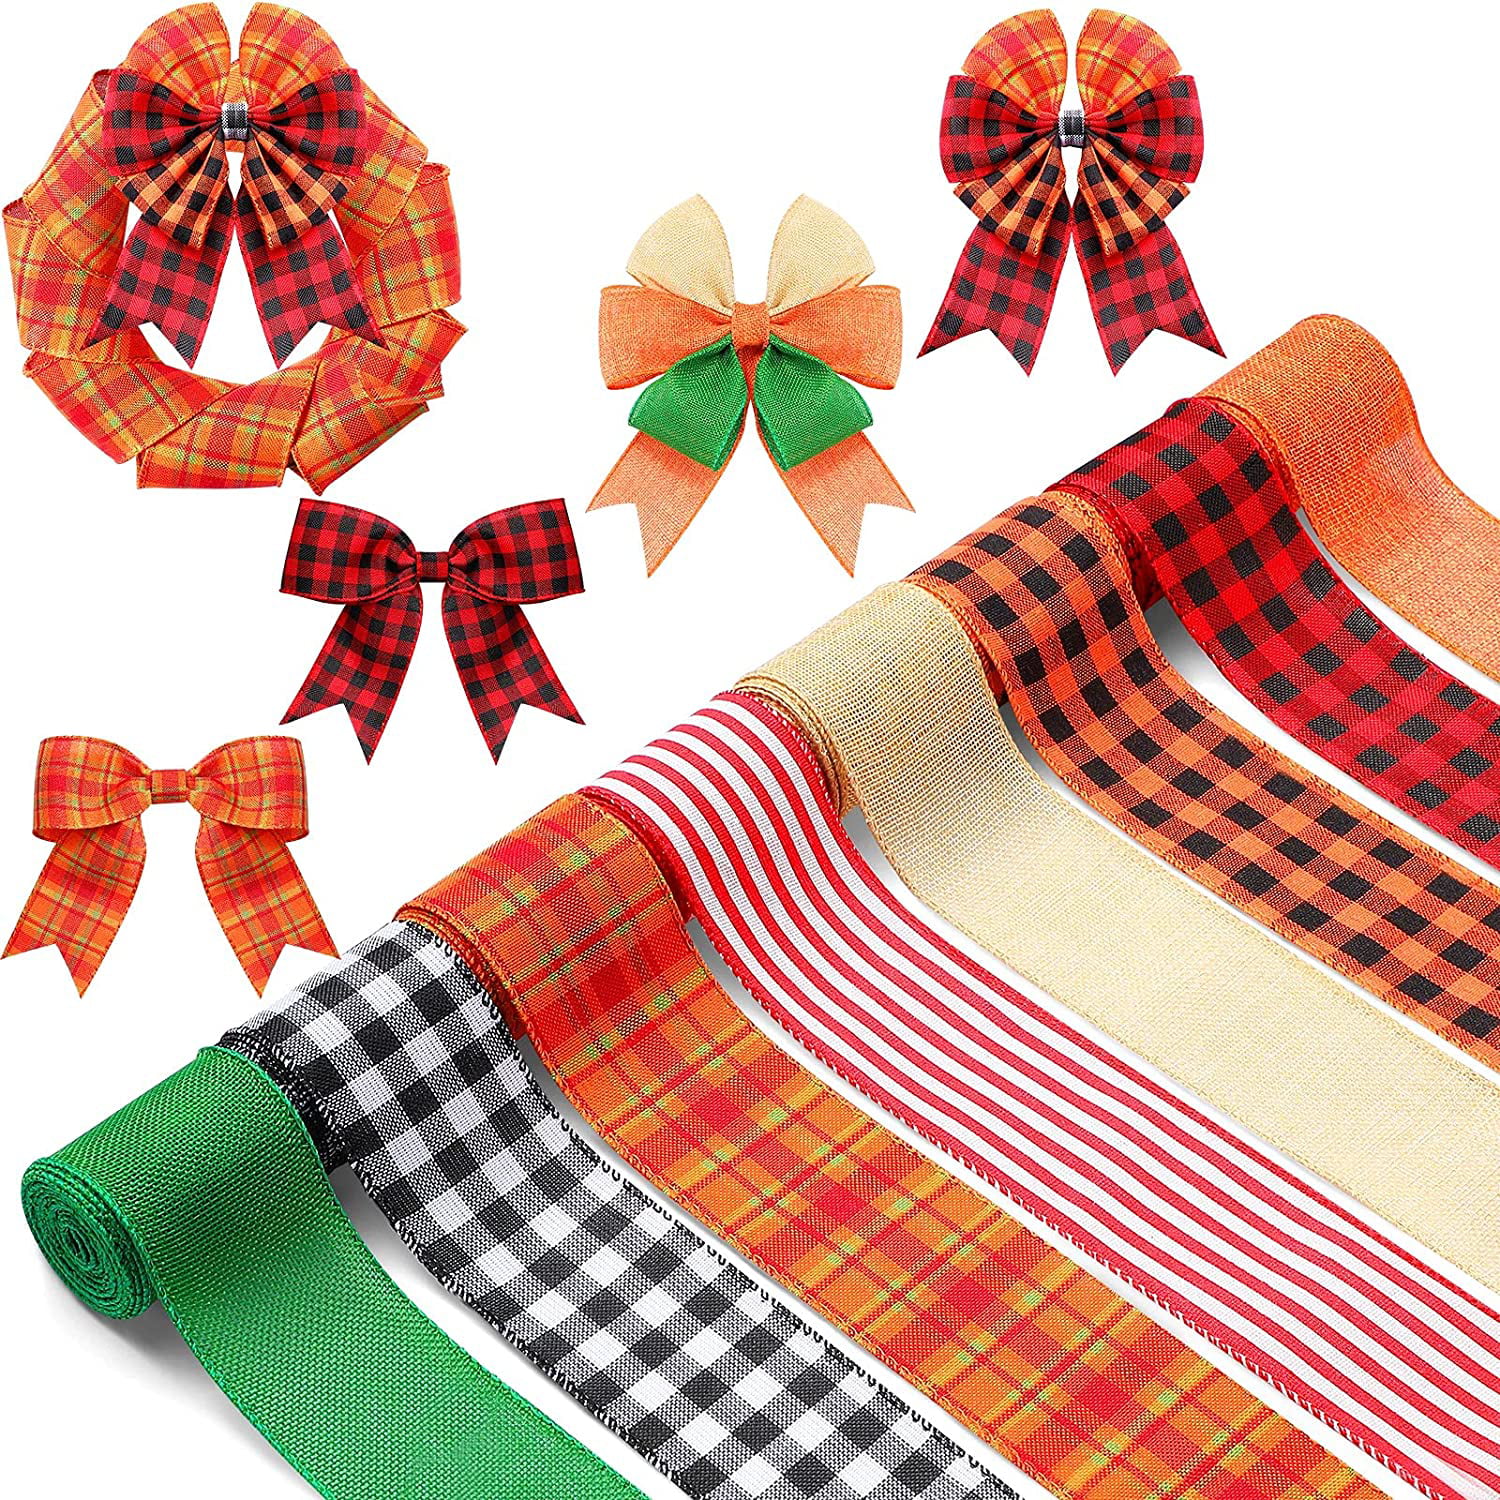 1 Rolls Christmas Ribbons Plaid Burlap Ribbon for DIY Gift Wrapping Decorations 